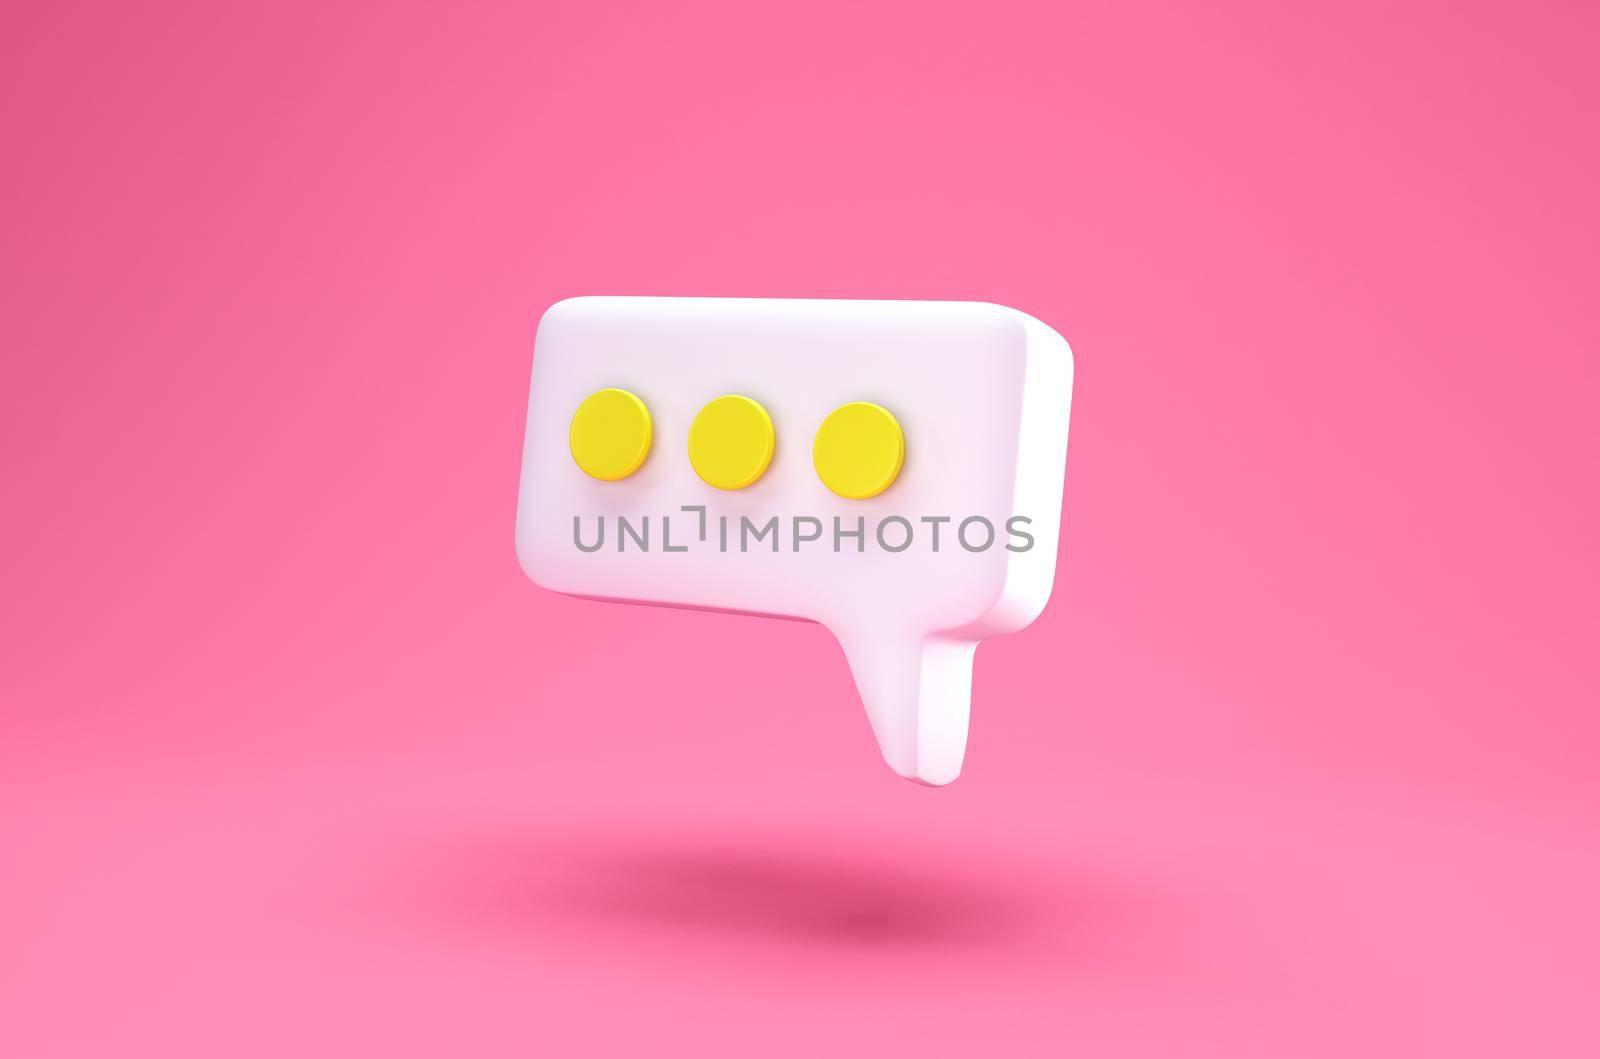 White Speech bubble chat icon isolated on pink background. Message creative concept with copy space for text. Communication or comment chat symbol. Minimalism concept. 3d illustration 3D render